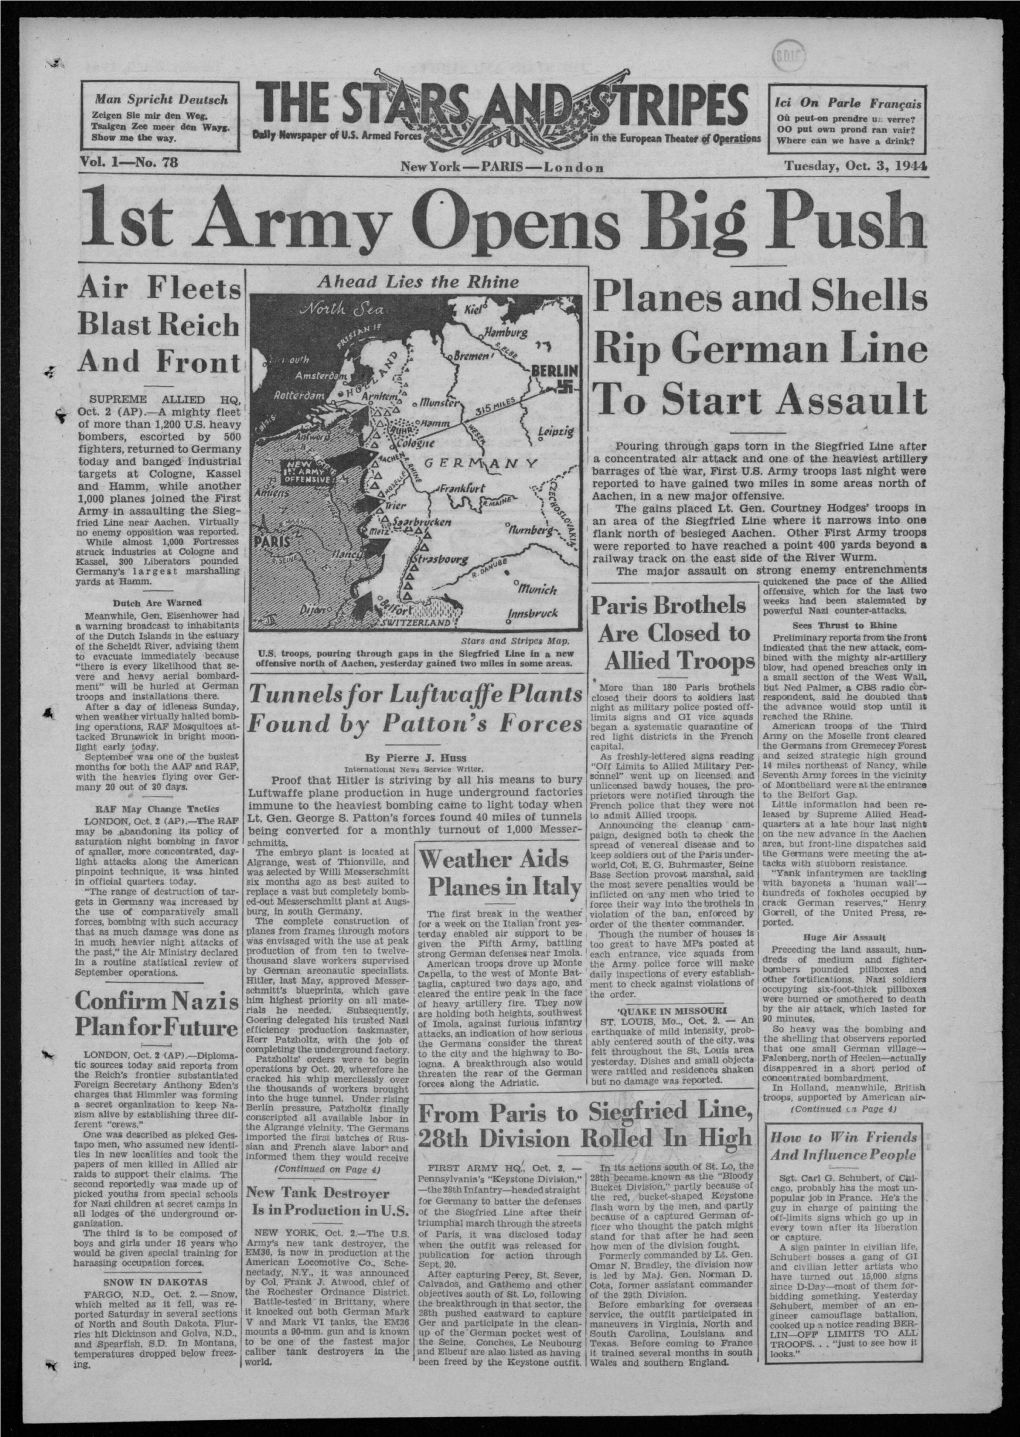 1 St Army Opens Big Push Air Fleets Planes and Shells Blast Reich and Front Rip German Line